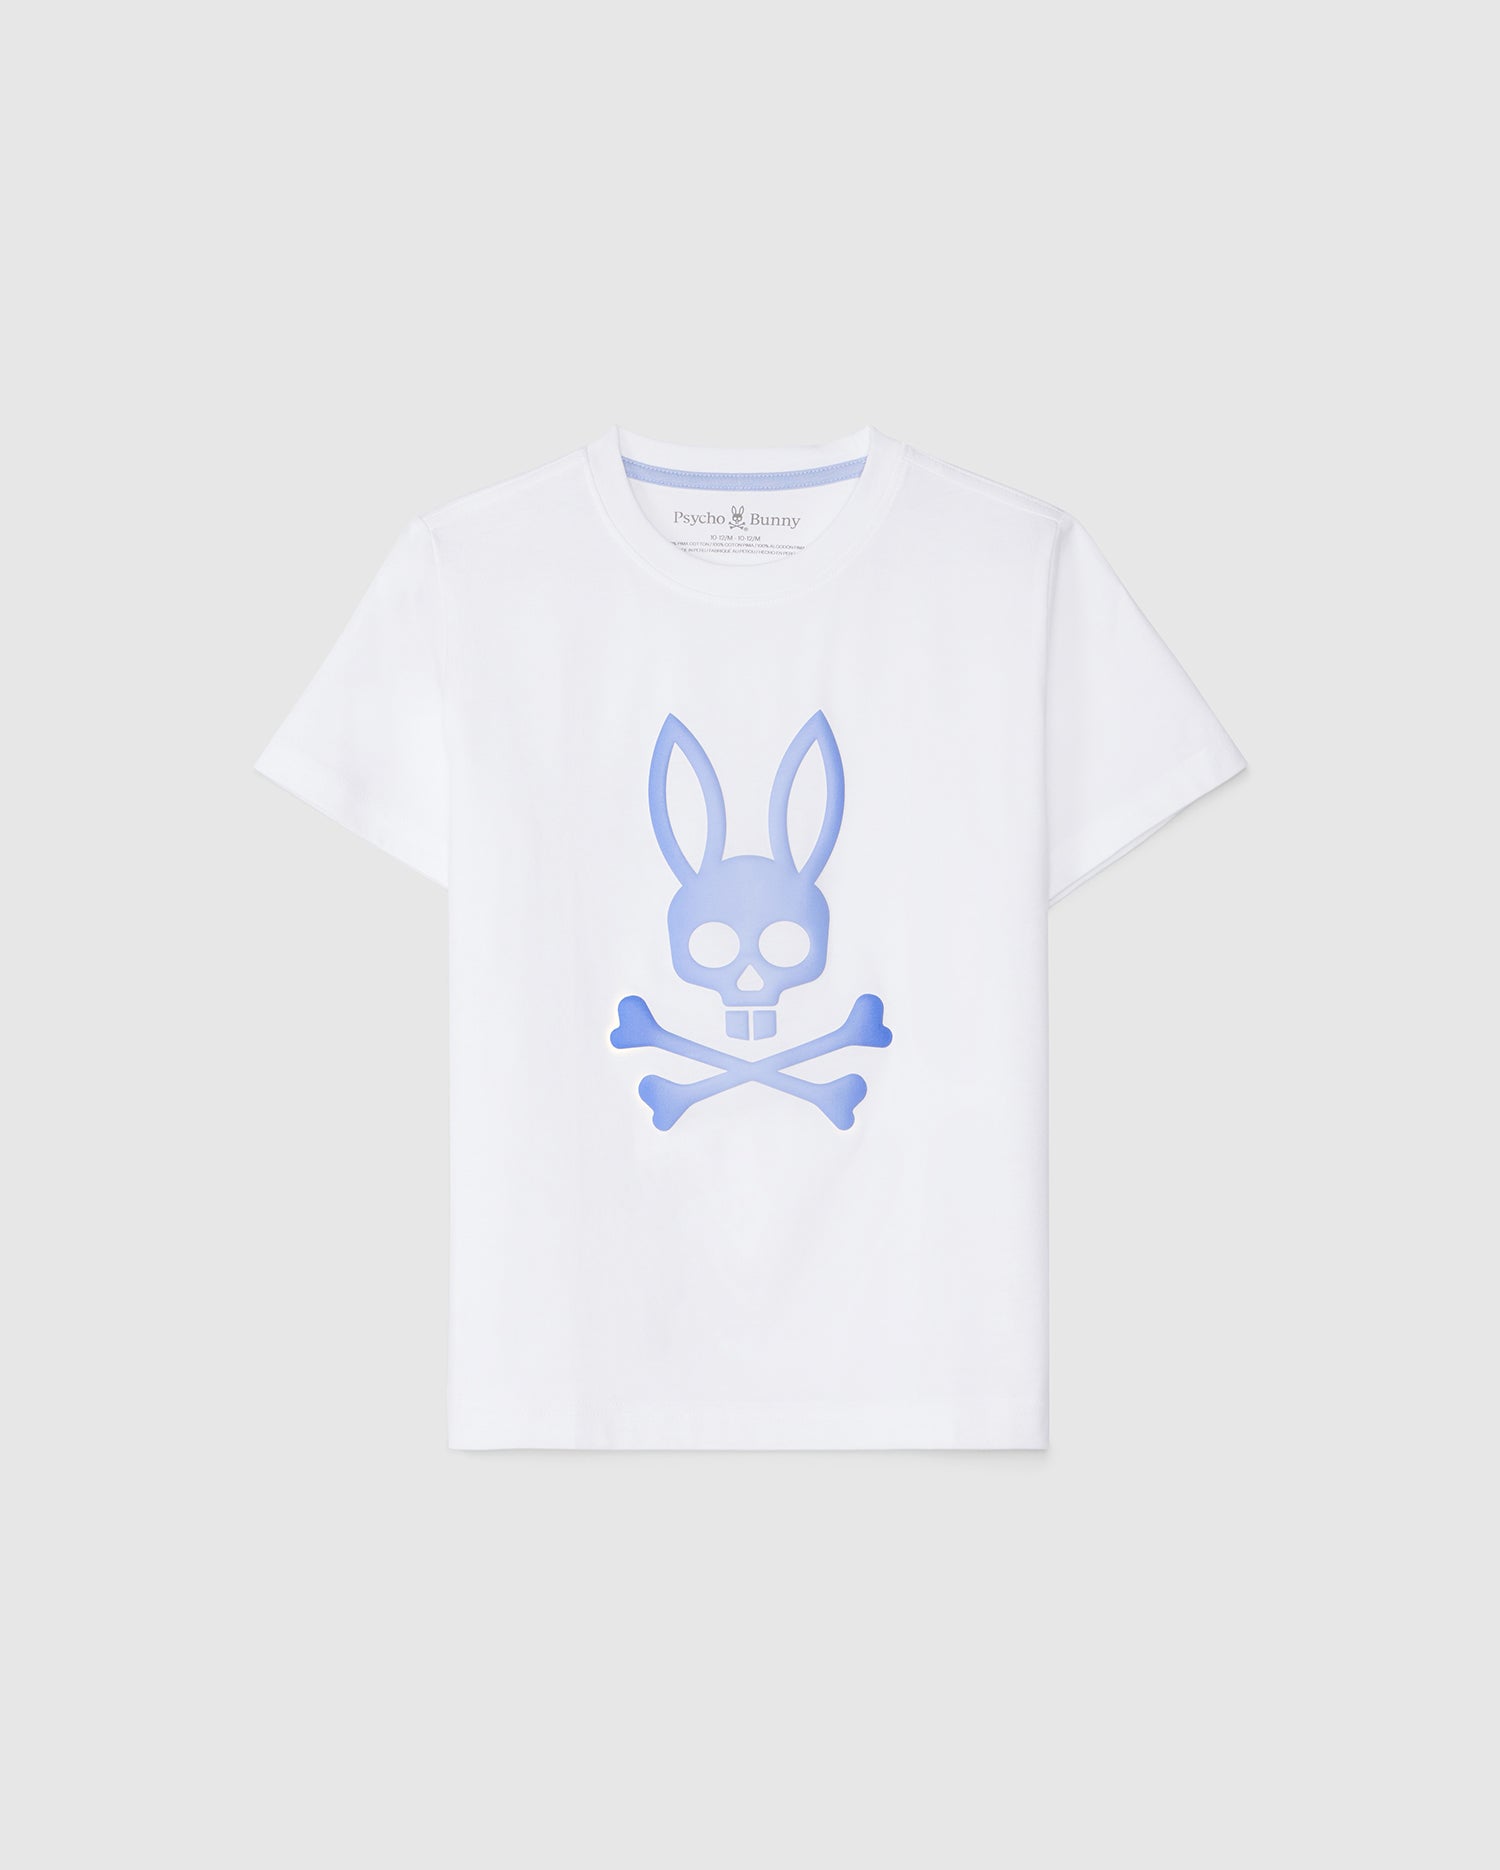 A kids' graphic tee featuring an HD-printed Bunny skull and crossbones with bunny ears on a plain background, crafted from soft Peruvian Pima cotton. Try the Psycho Bunny KIDS NORWOOD GRAPHIC TEE - B0U311B2TS.